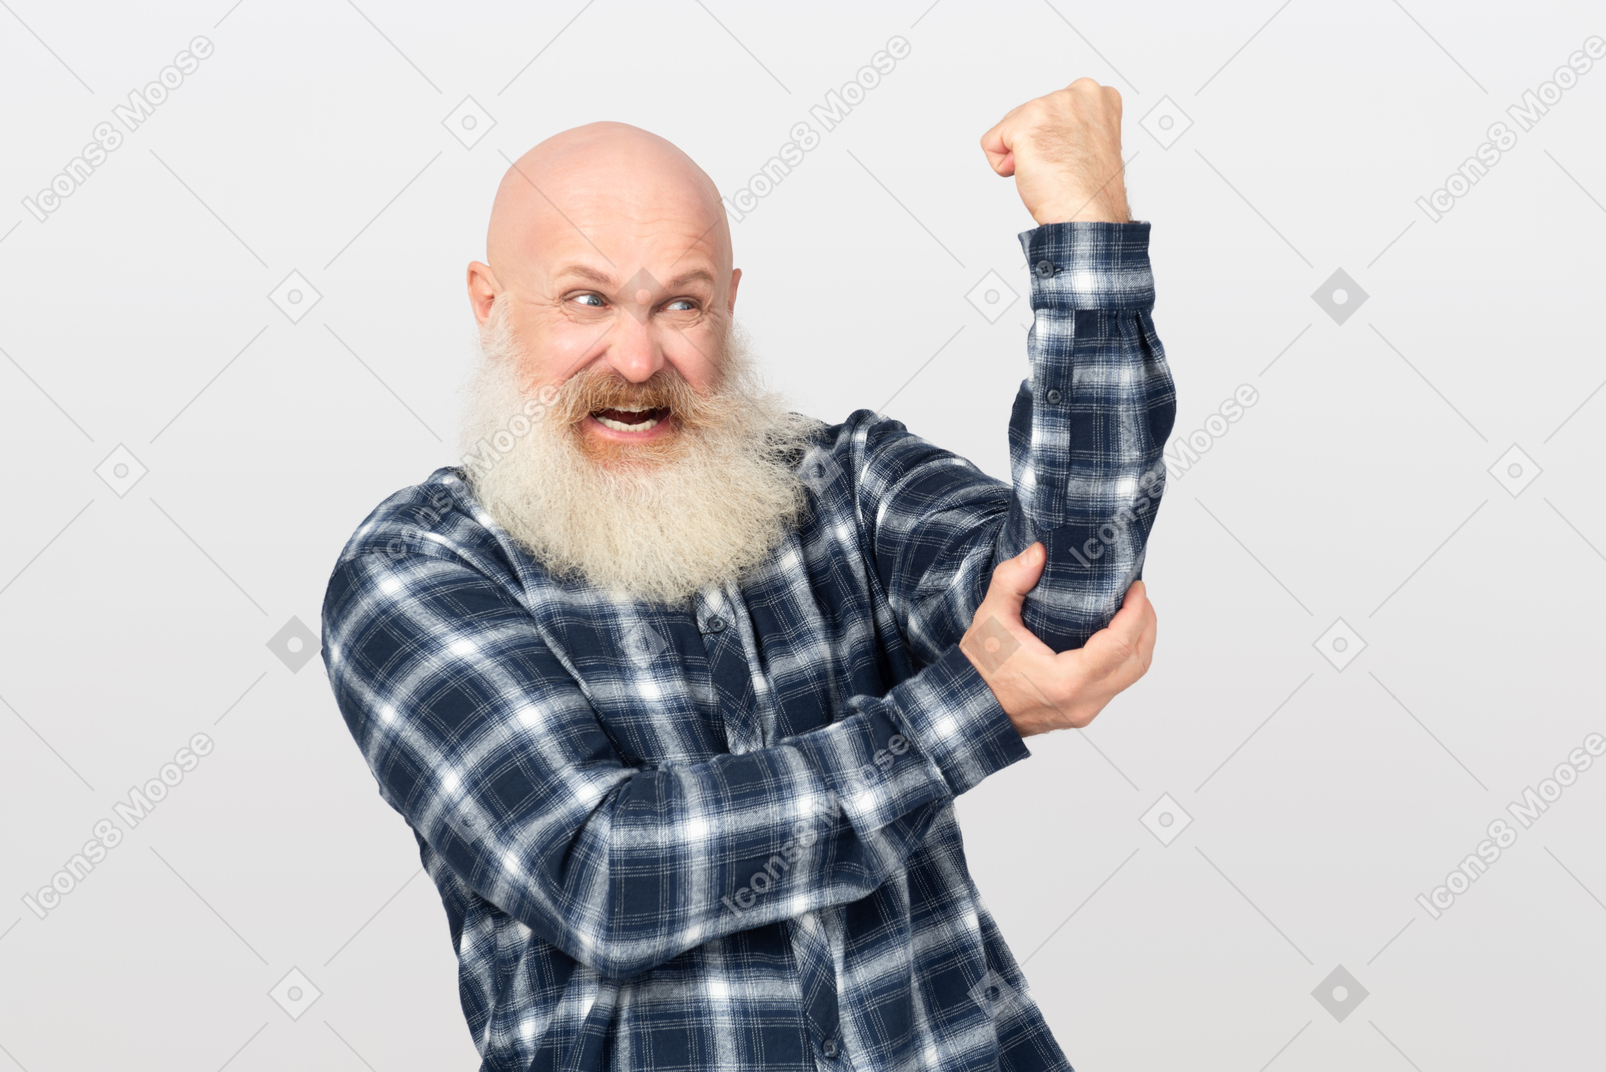 Angry bearded man making a rude gesture